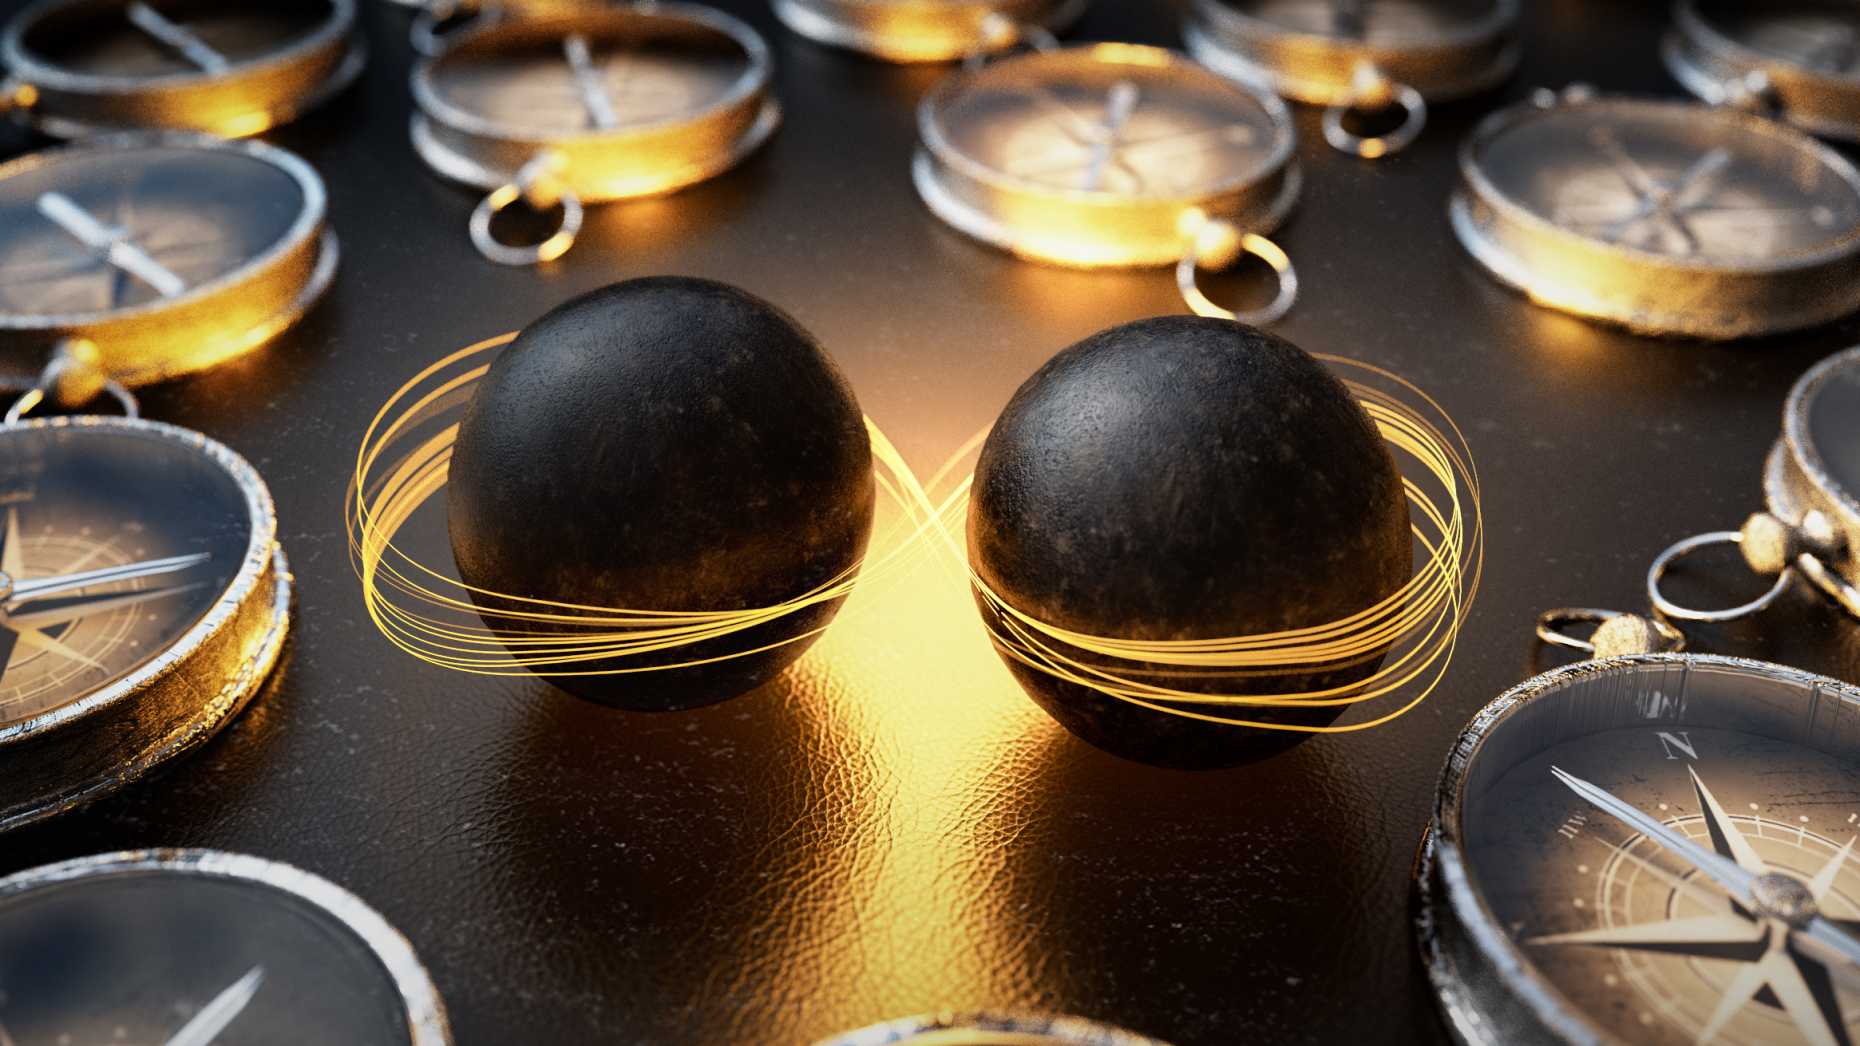 The image show two black spheres representing holes in an ordered magnetic array of spins illustrated with compasses.